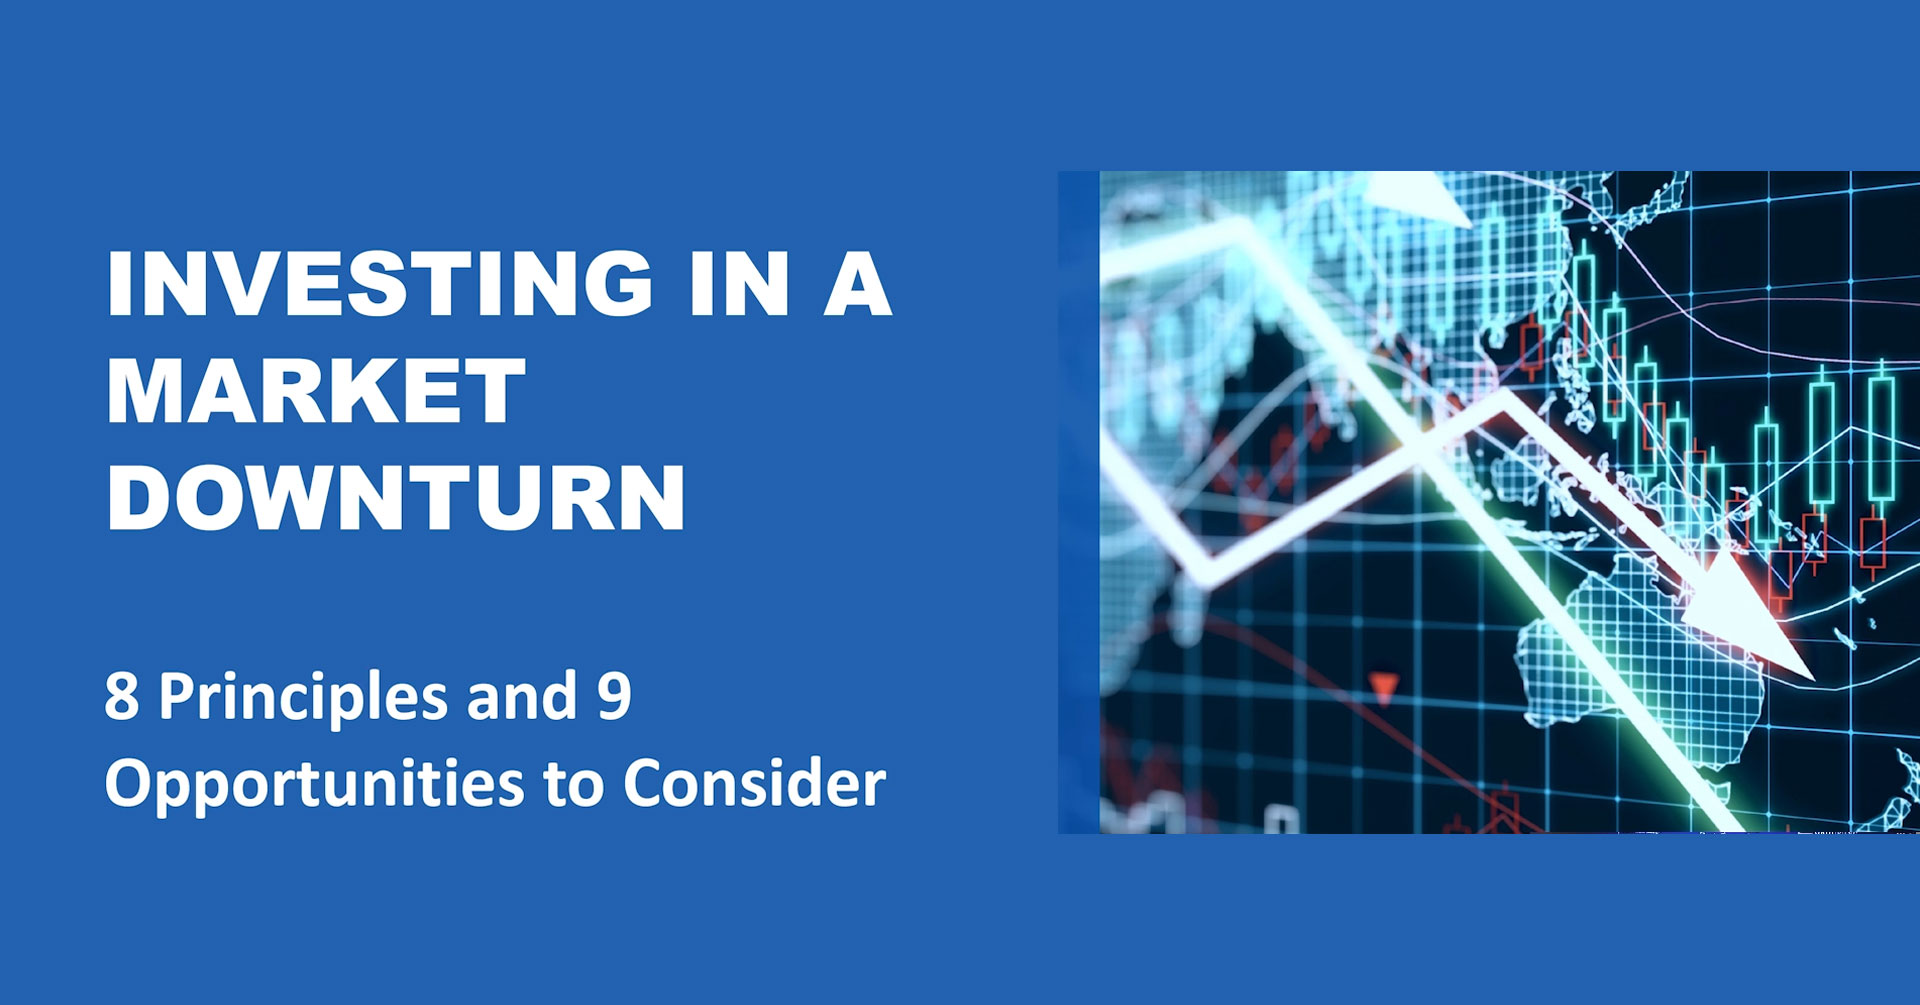 8 Principals and 9 Opportunities for Making the Most of a Market Downturn.